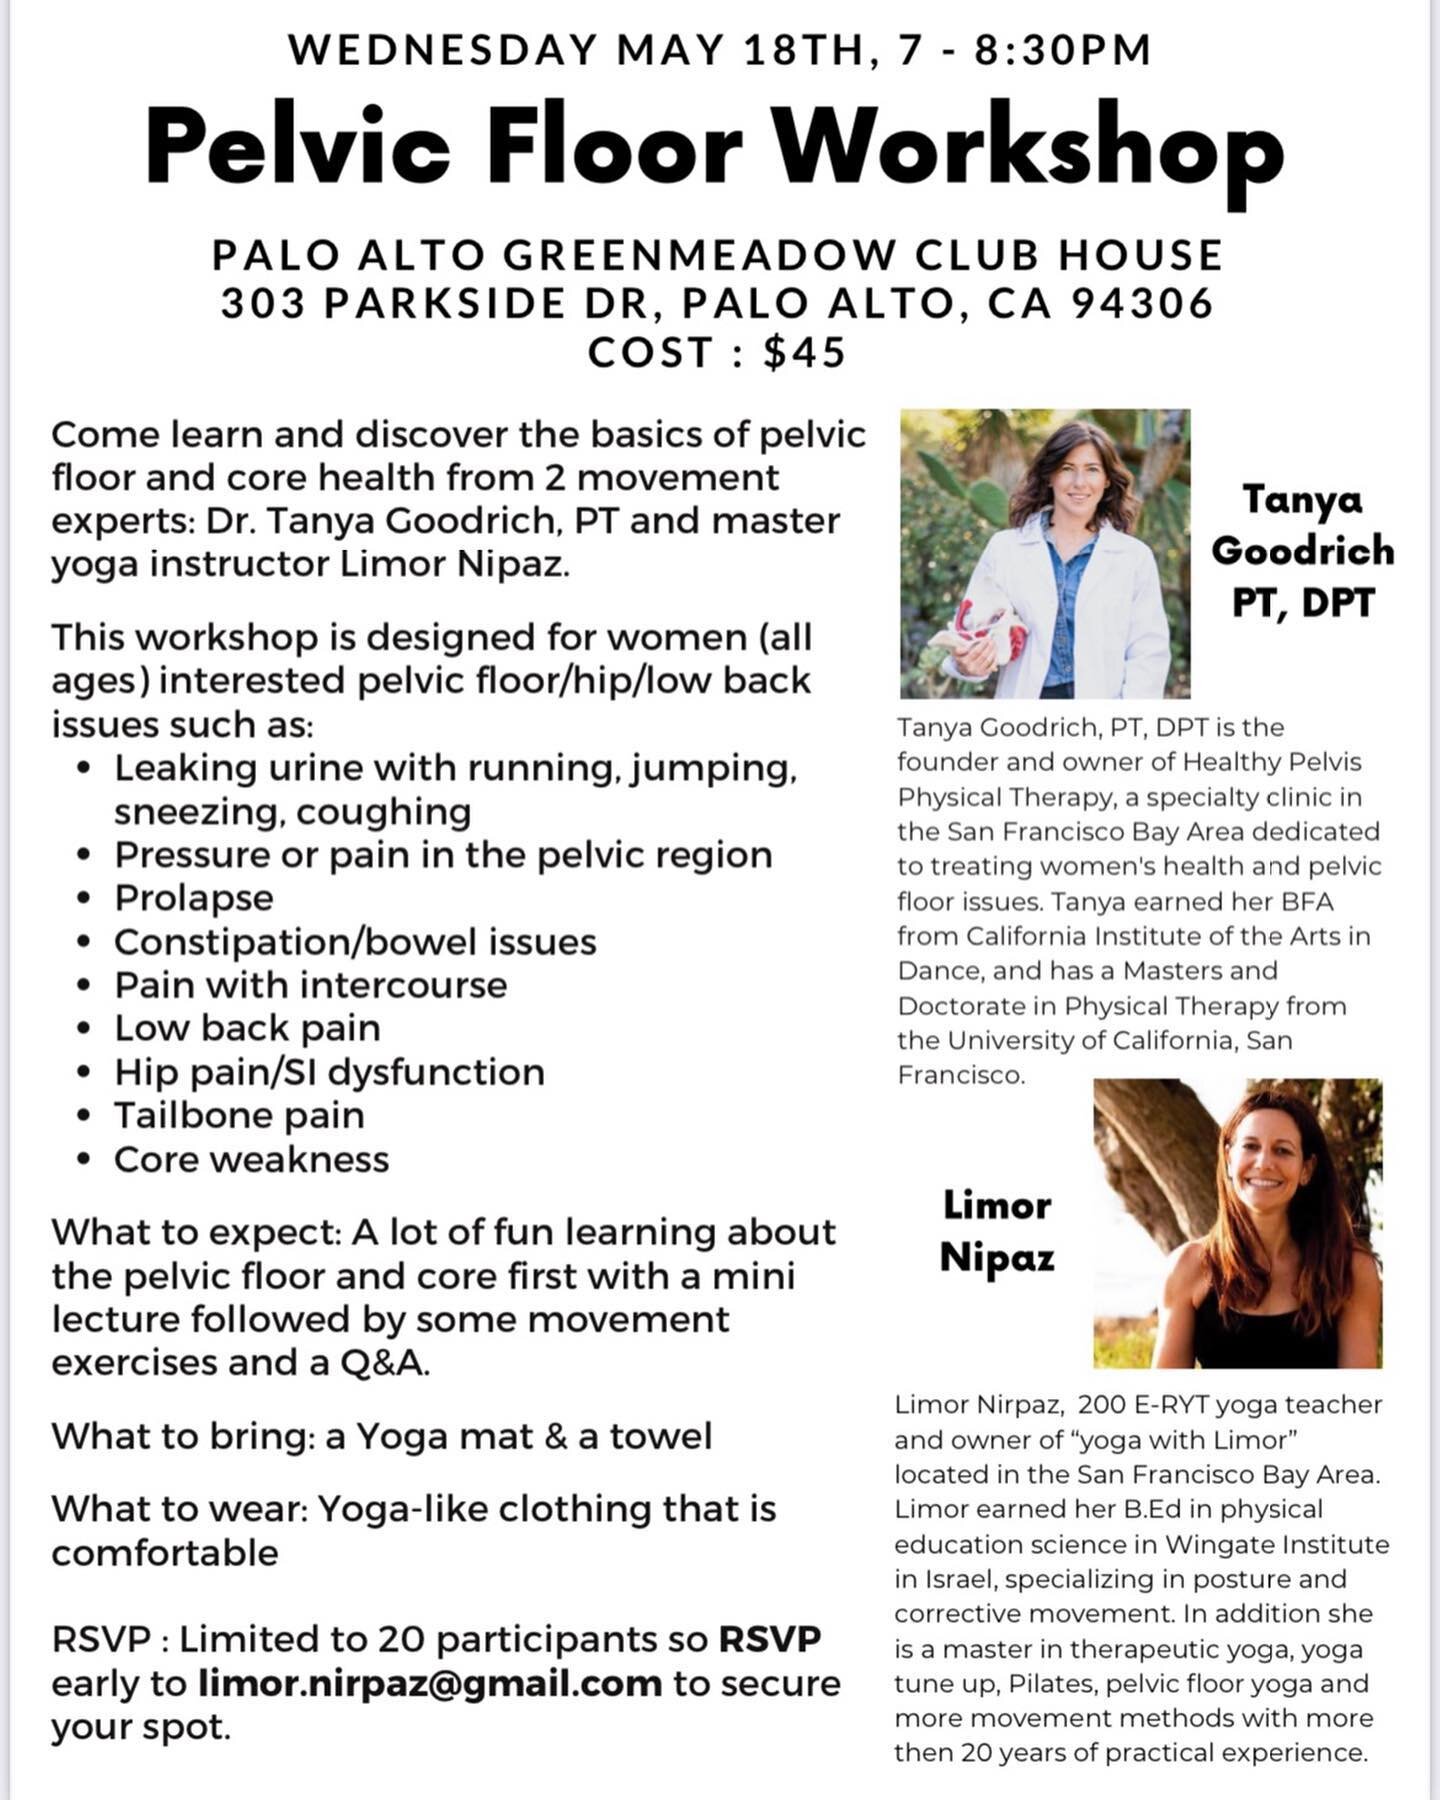 Local peeps! Check out this Pelvic Floor Workshop I am doing with yoga specialist Limor Nirpaz next Wednesday at Greenmeadow in Palo Alto. Only a few spots left!